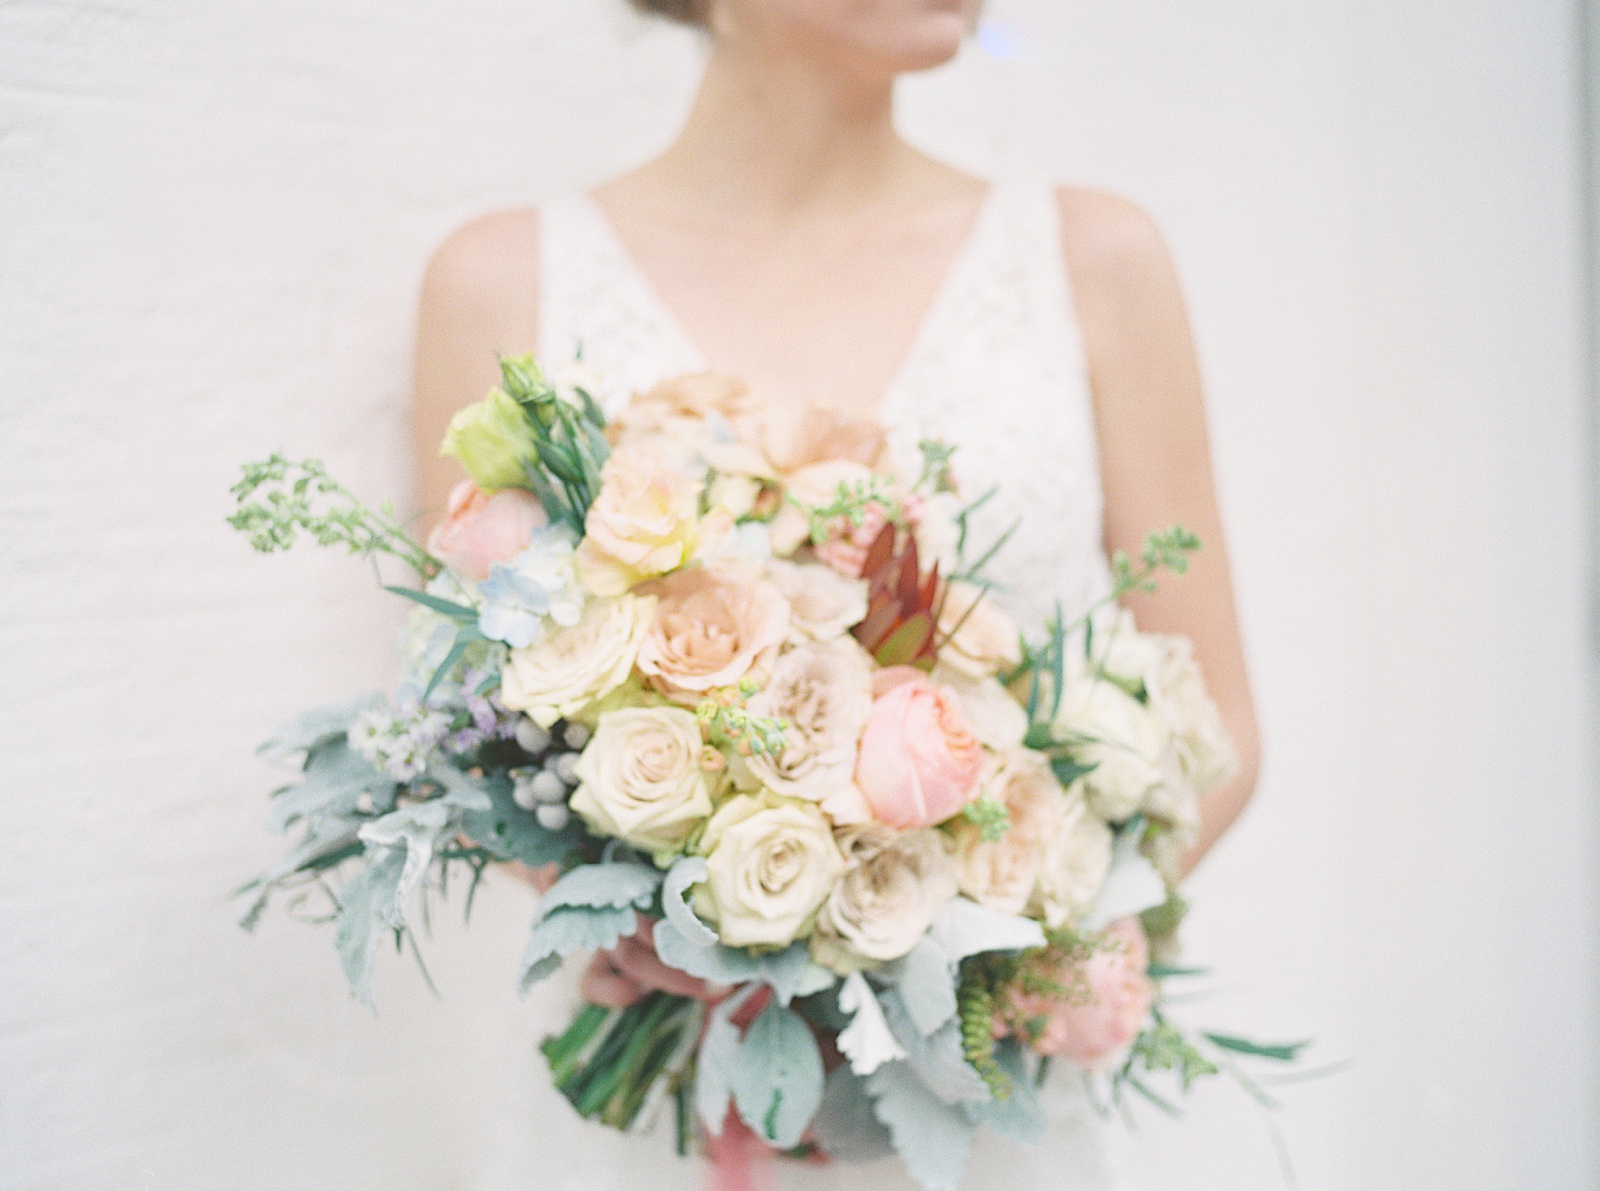 Whimsical Wedding Bouquets, Film Photography, Anna Kay Photography, San Antonio Wedding Photographer